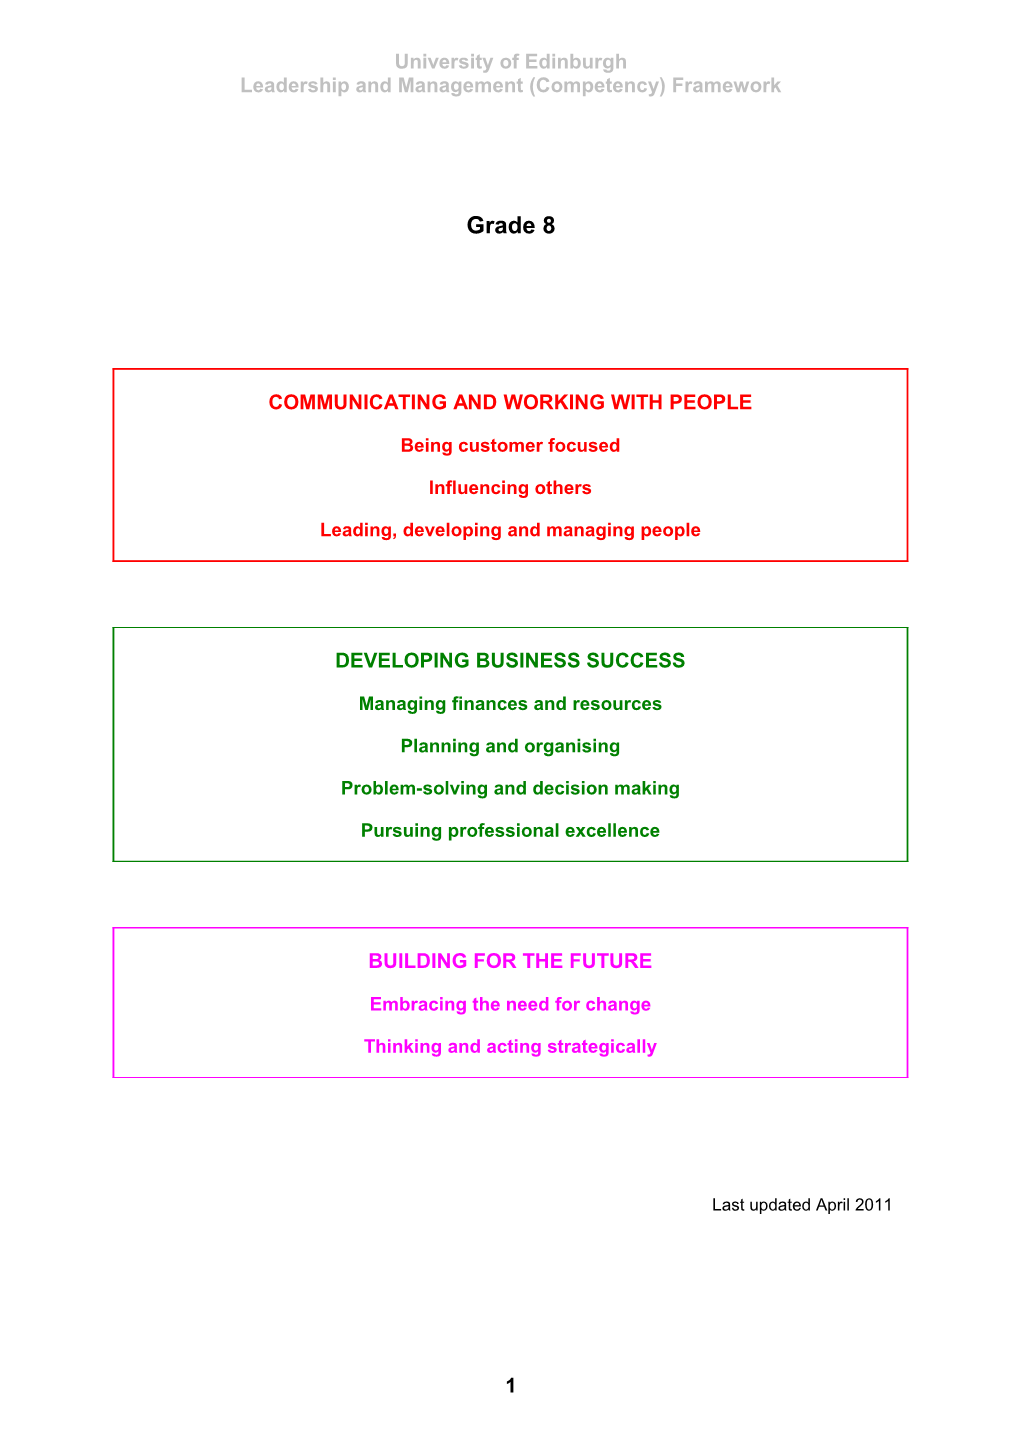 Leadership and Management (Competency) Framework